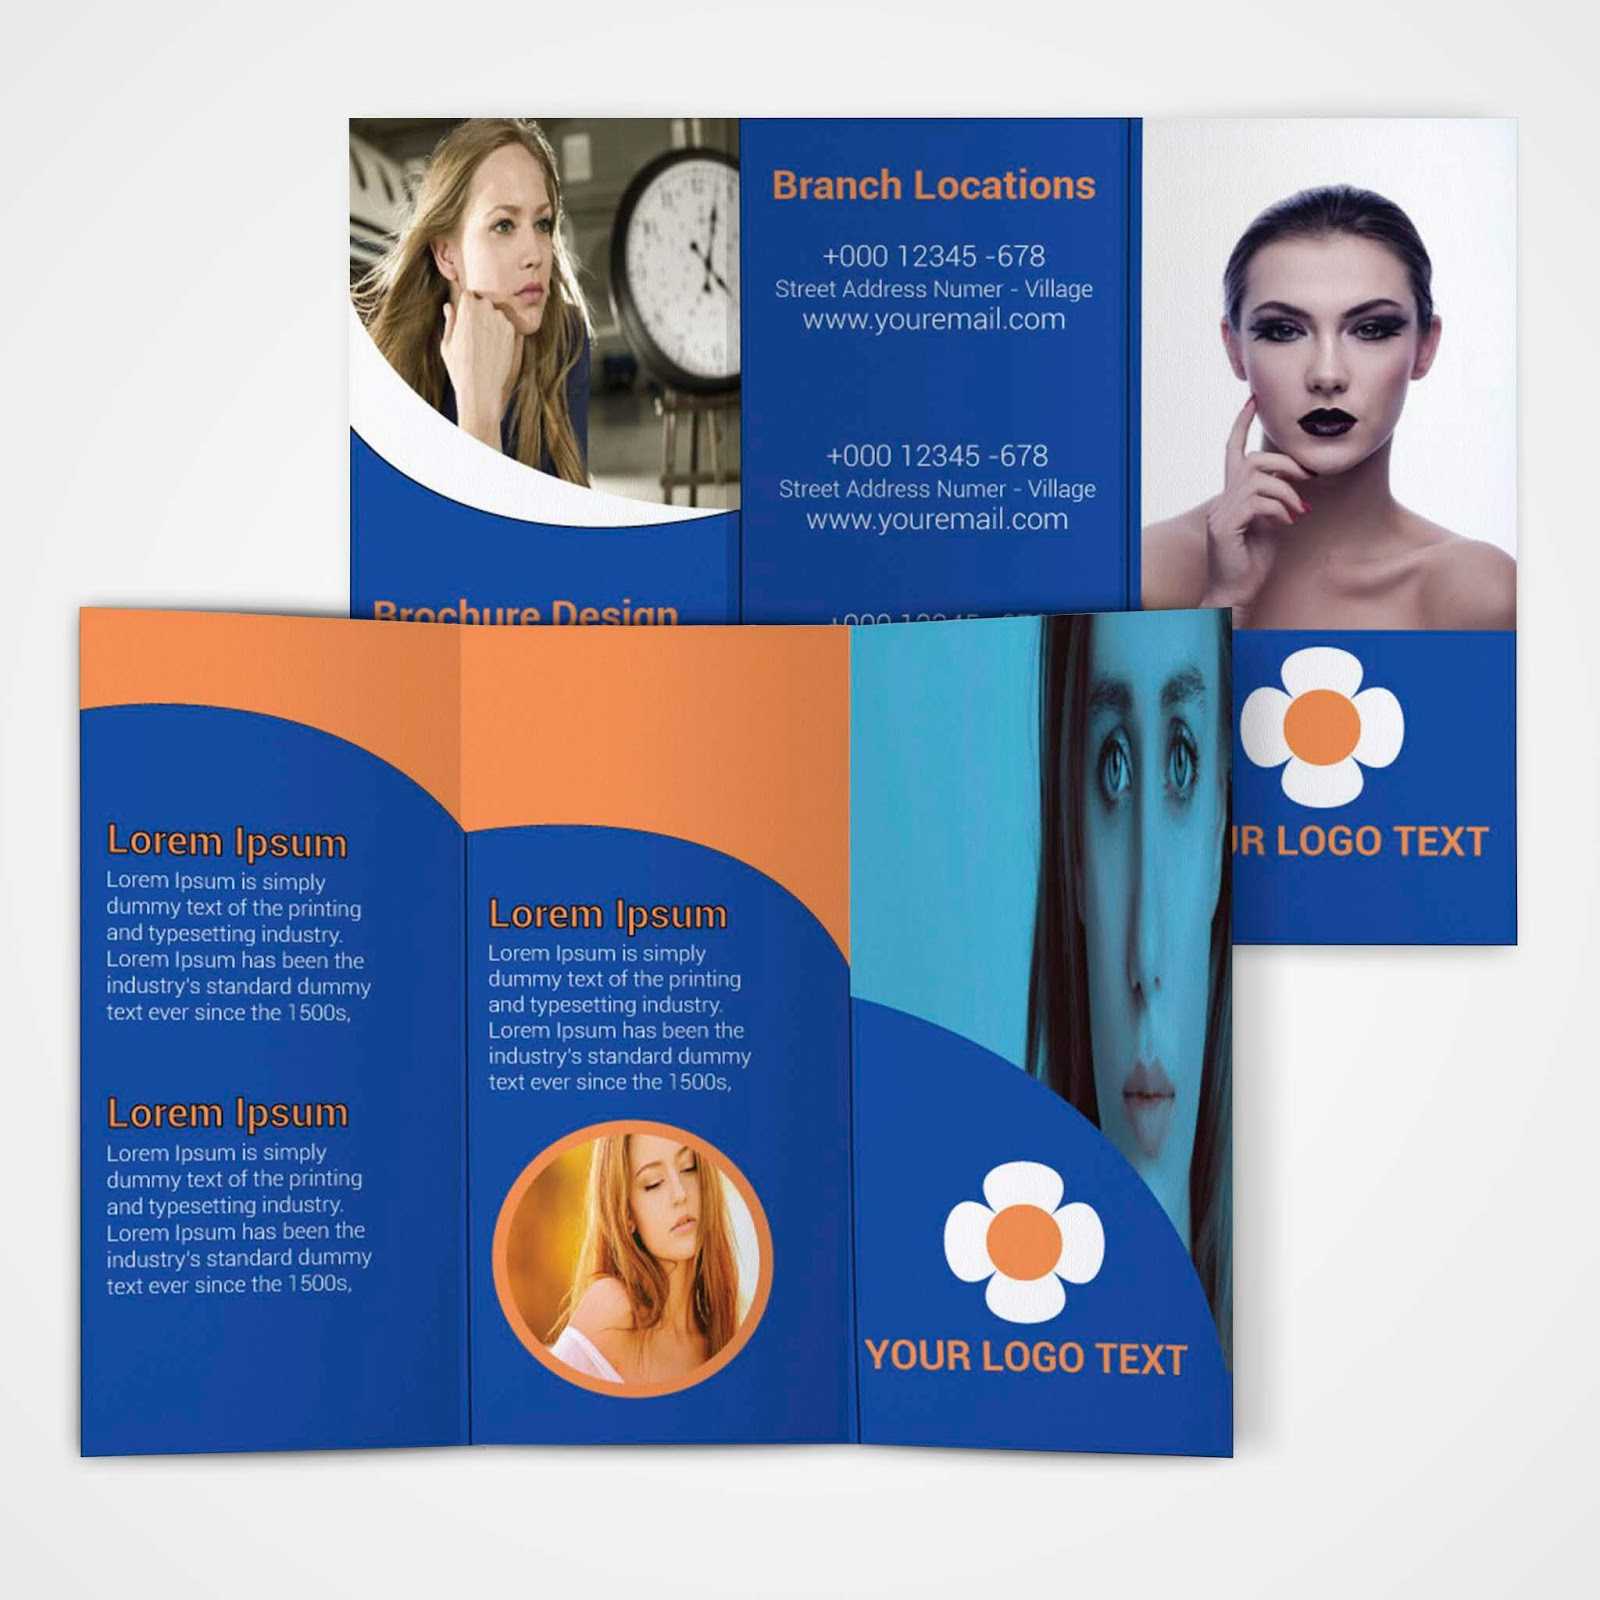 Free Tri Fold Brochure Template – Download Free Tri Fold Regarding Free Illustrator Brochure Templates Download